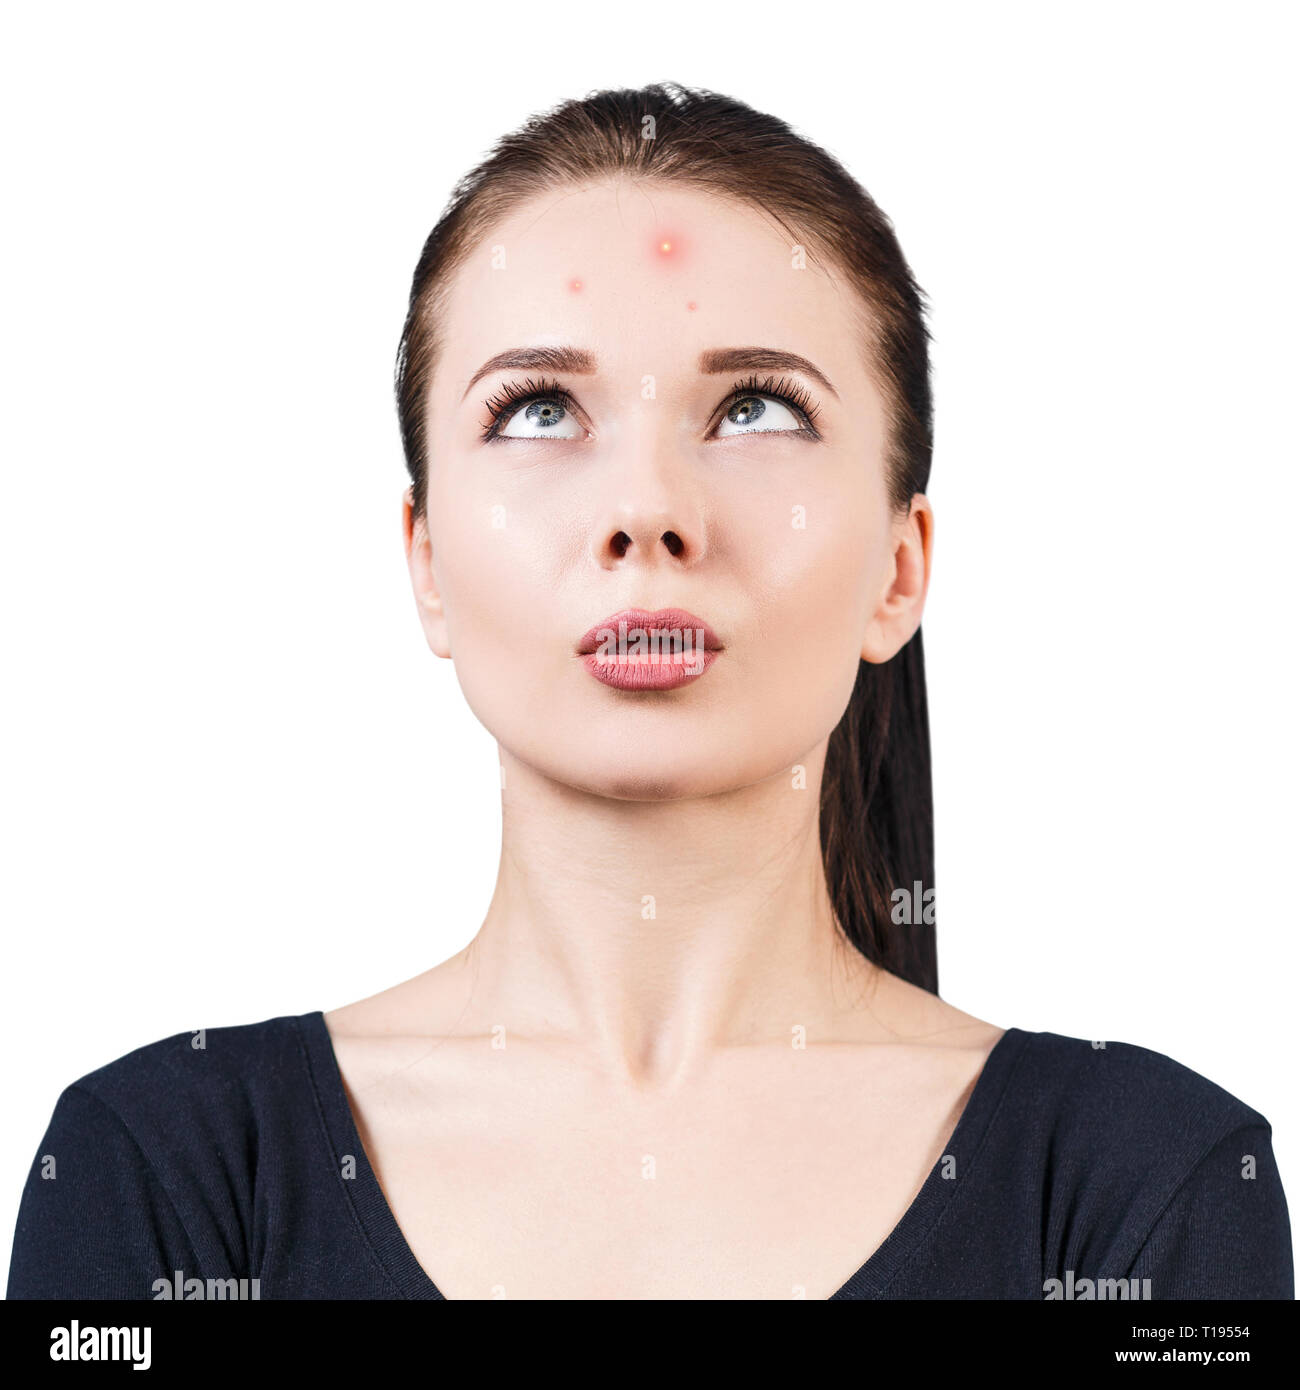 https://c8.alamy.com/comp/T19554/woman-with-pimple-on-face-T19554.jpg